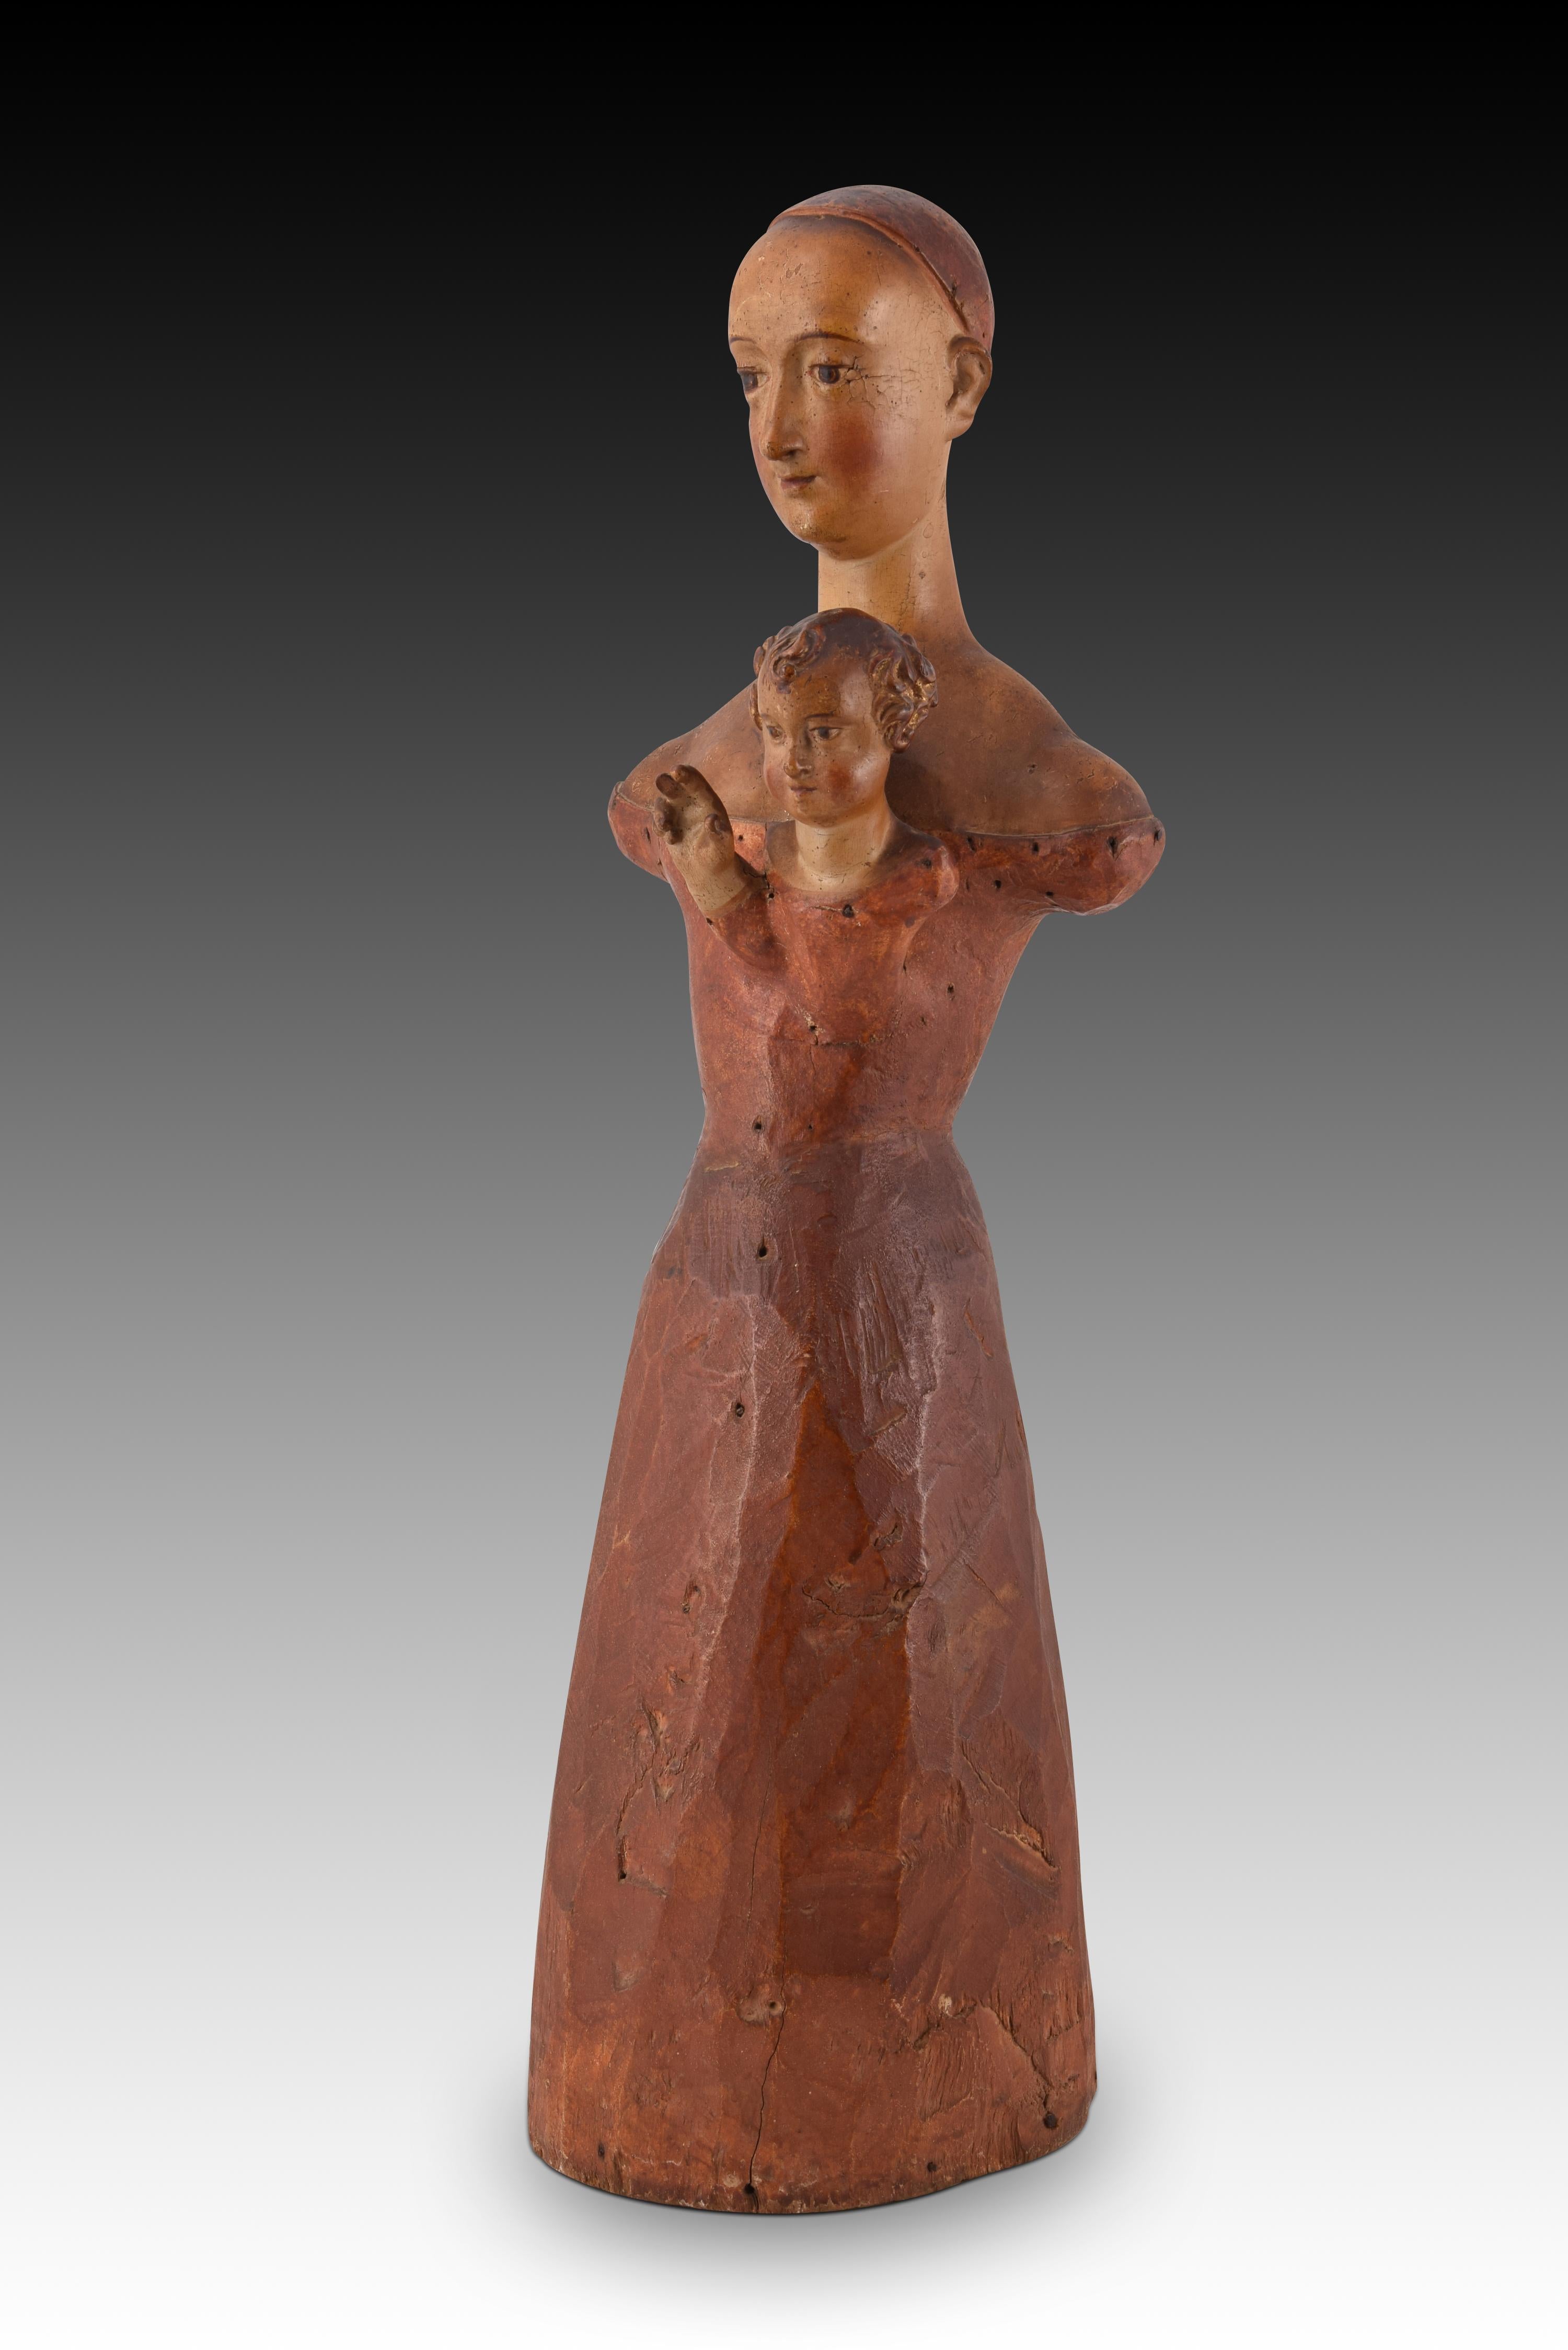 Virgin and Child dress. Carved and polychrome wood. Spanish school, 17th century. 
Partially polychrome wood carving that shows a practically only roughened area and, at the top, the head and shoulders of a Virgin Mary (with the skull to accept hair